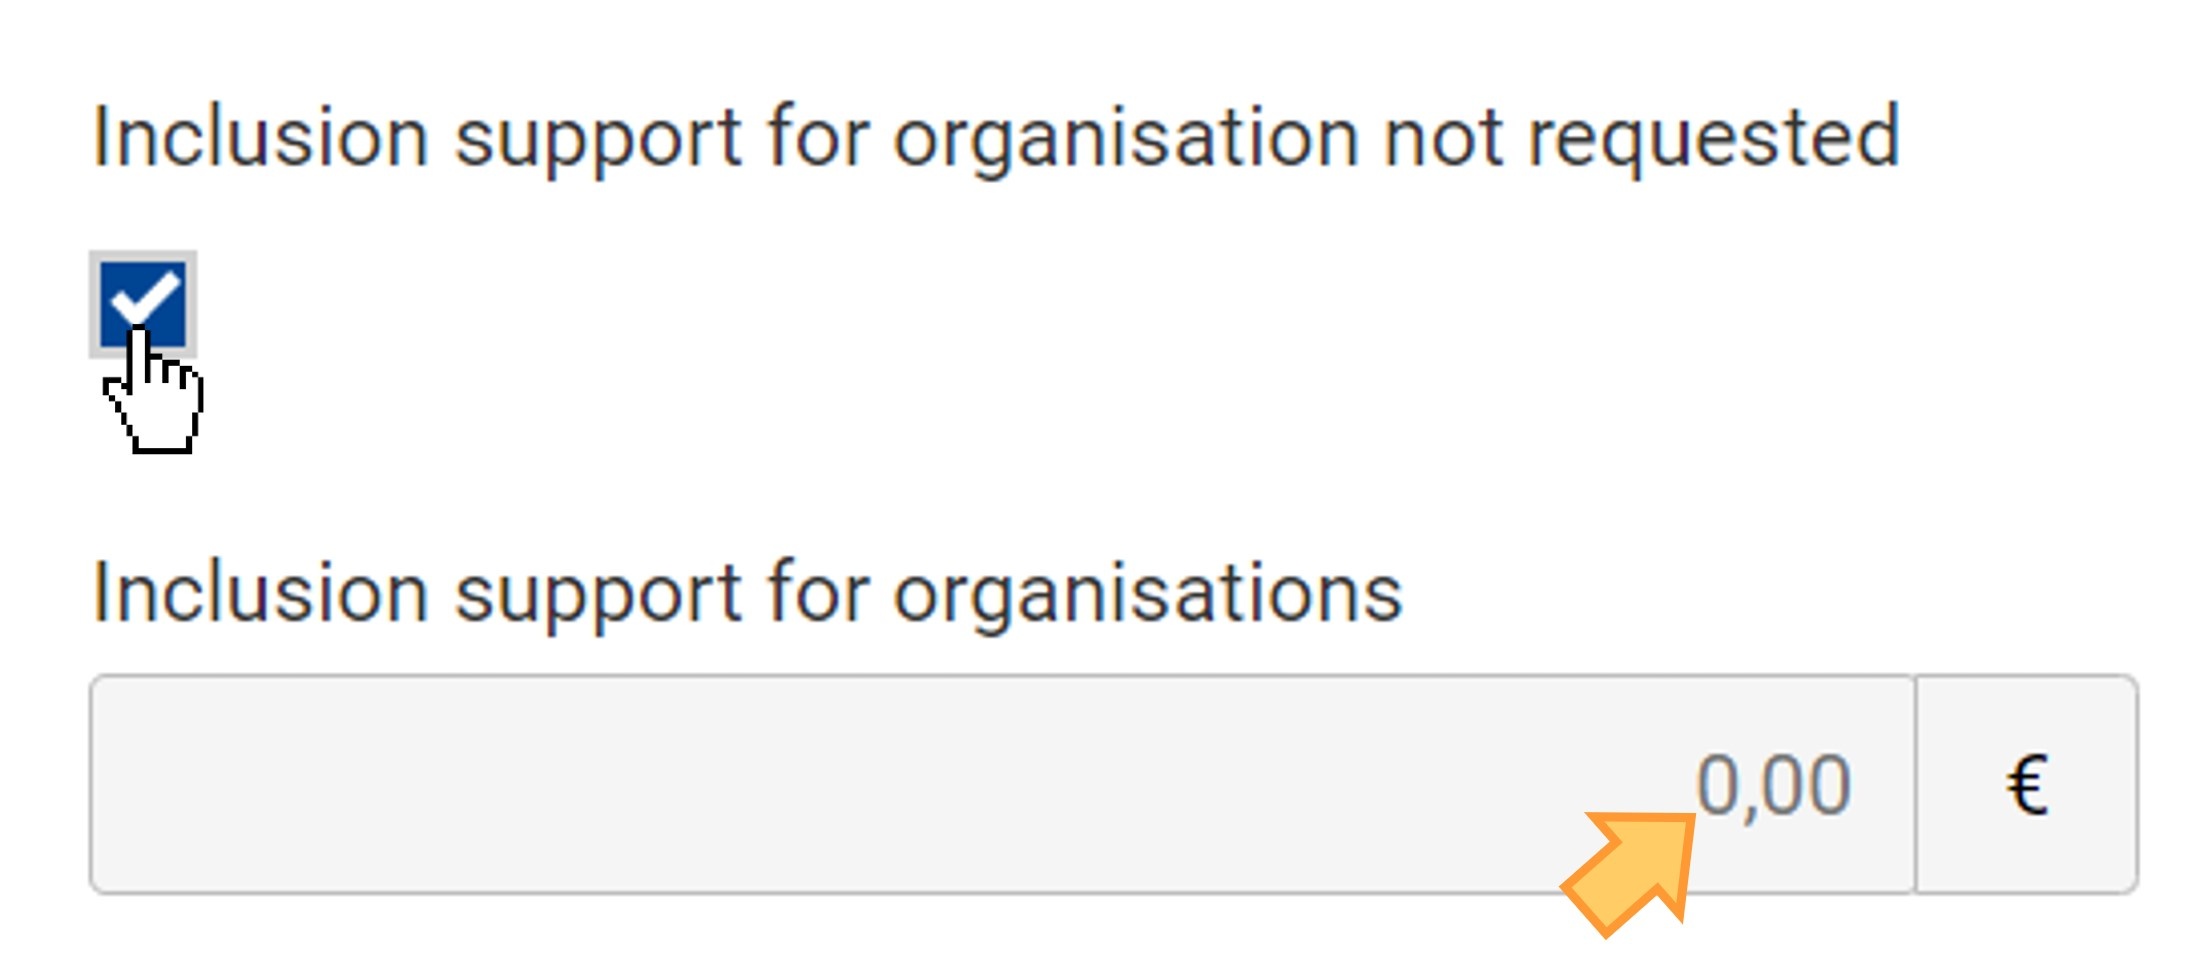 Inclusion support for organisation not requested flag